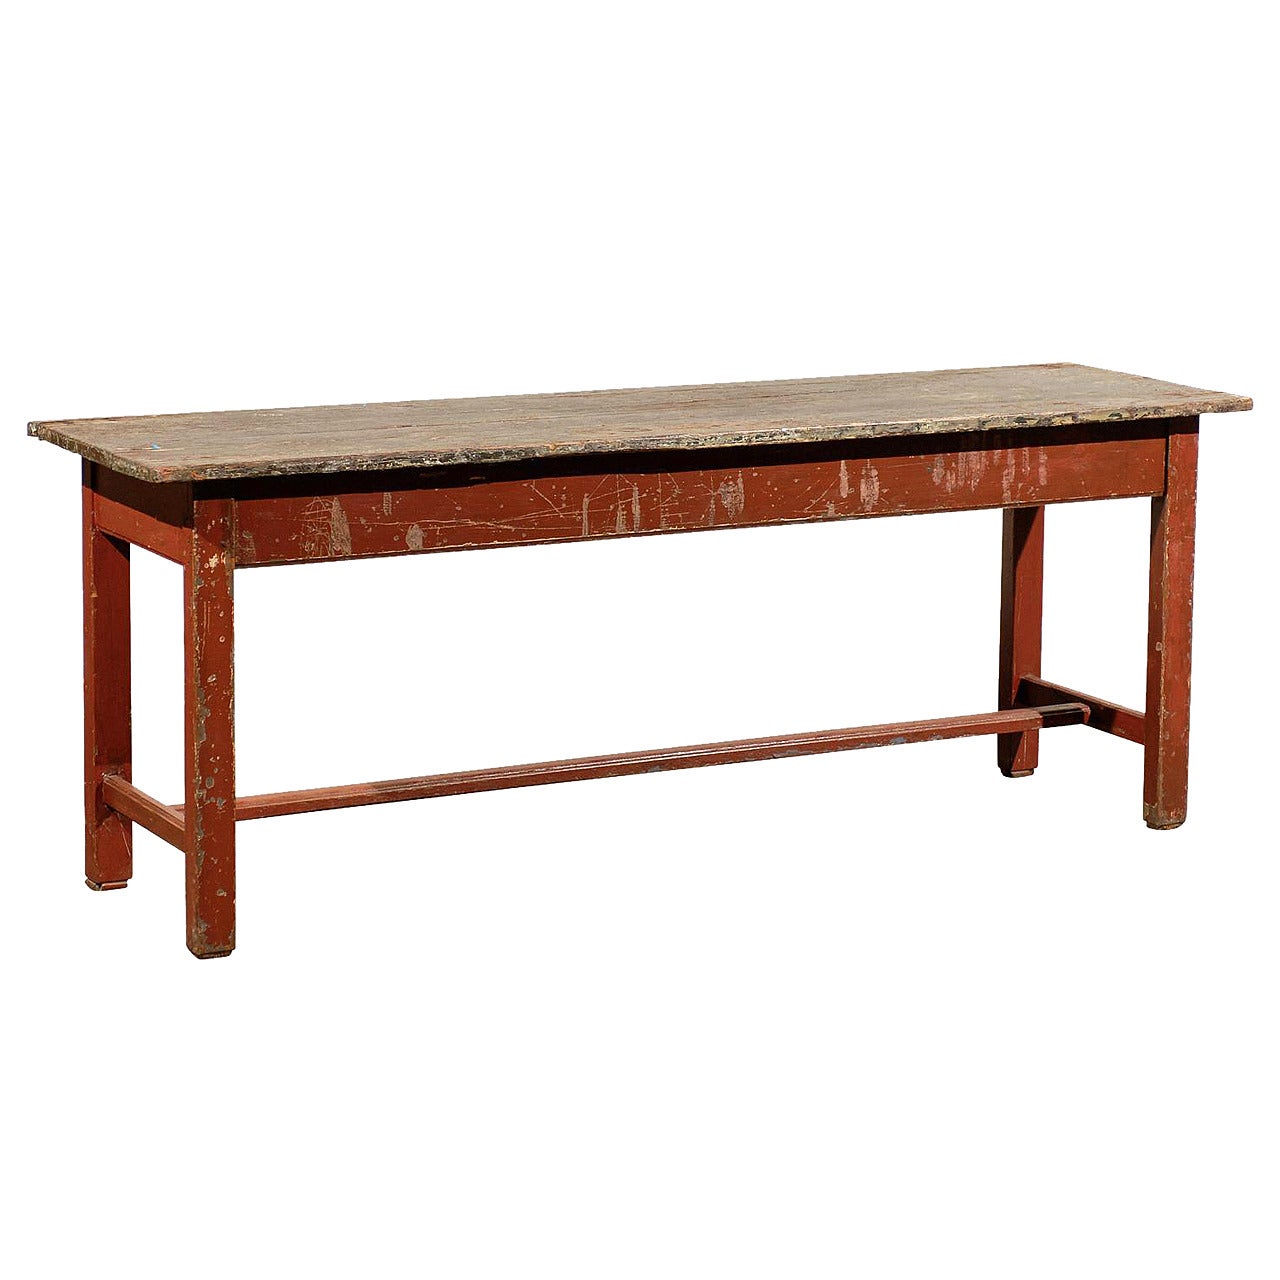 Turn of the Century American Incredible Long Table-Pegged